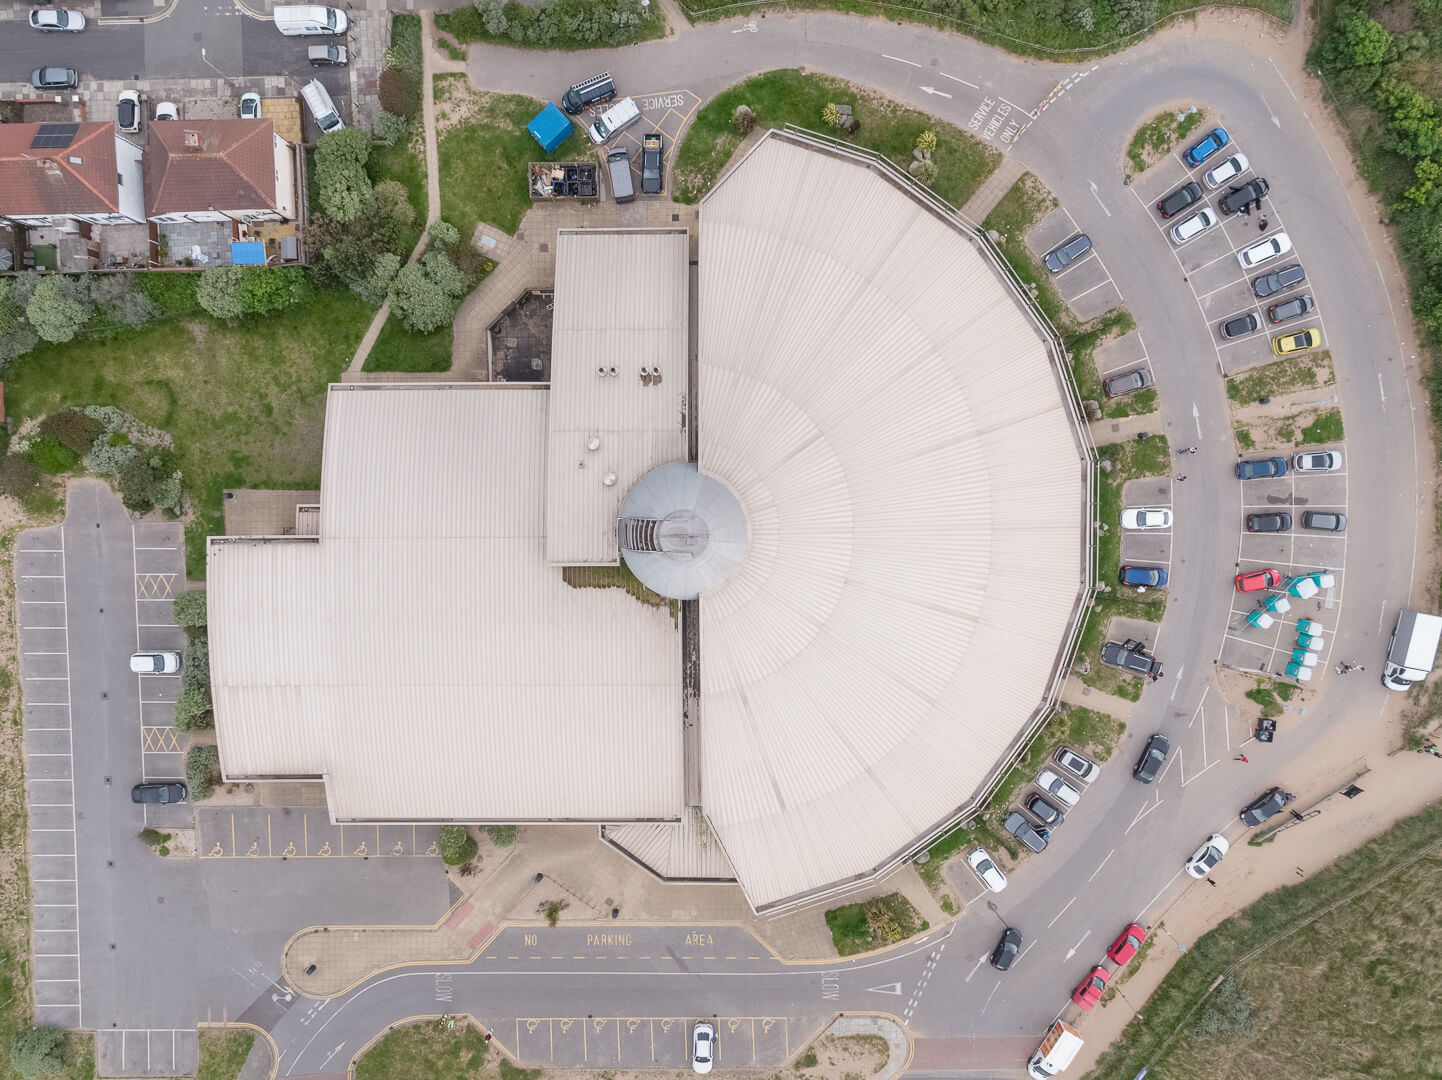 Aerial photography - Drone roof survey of Crosby Leisure Centre, Liverpool to locate source of ongoing leaks